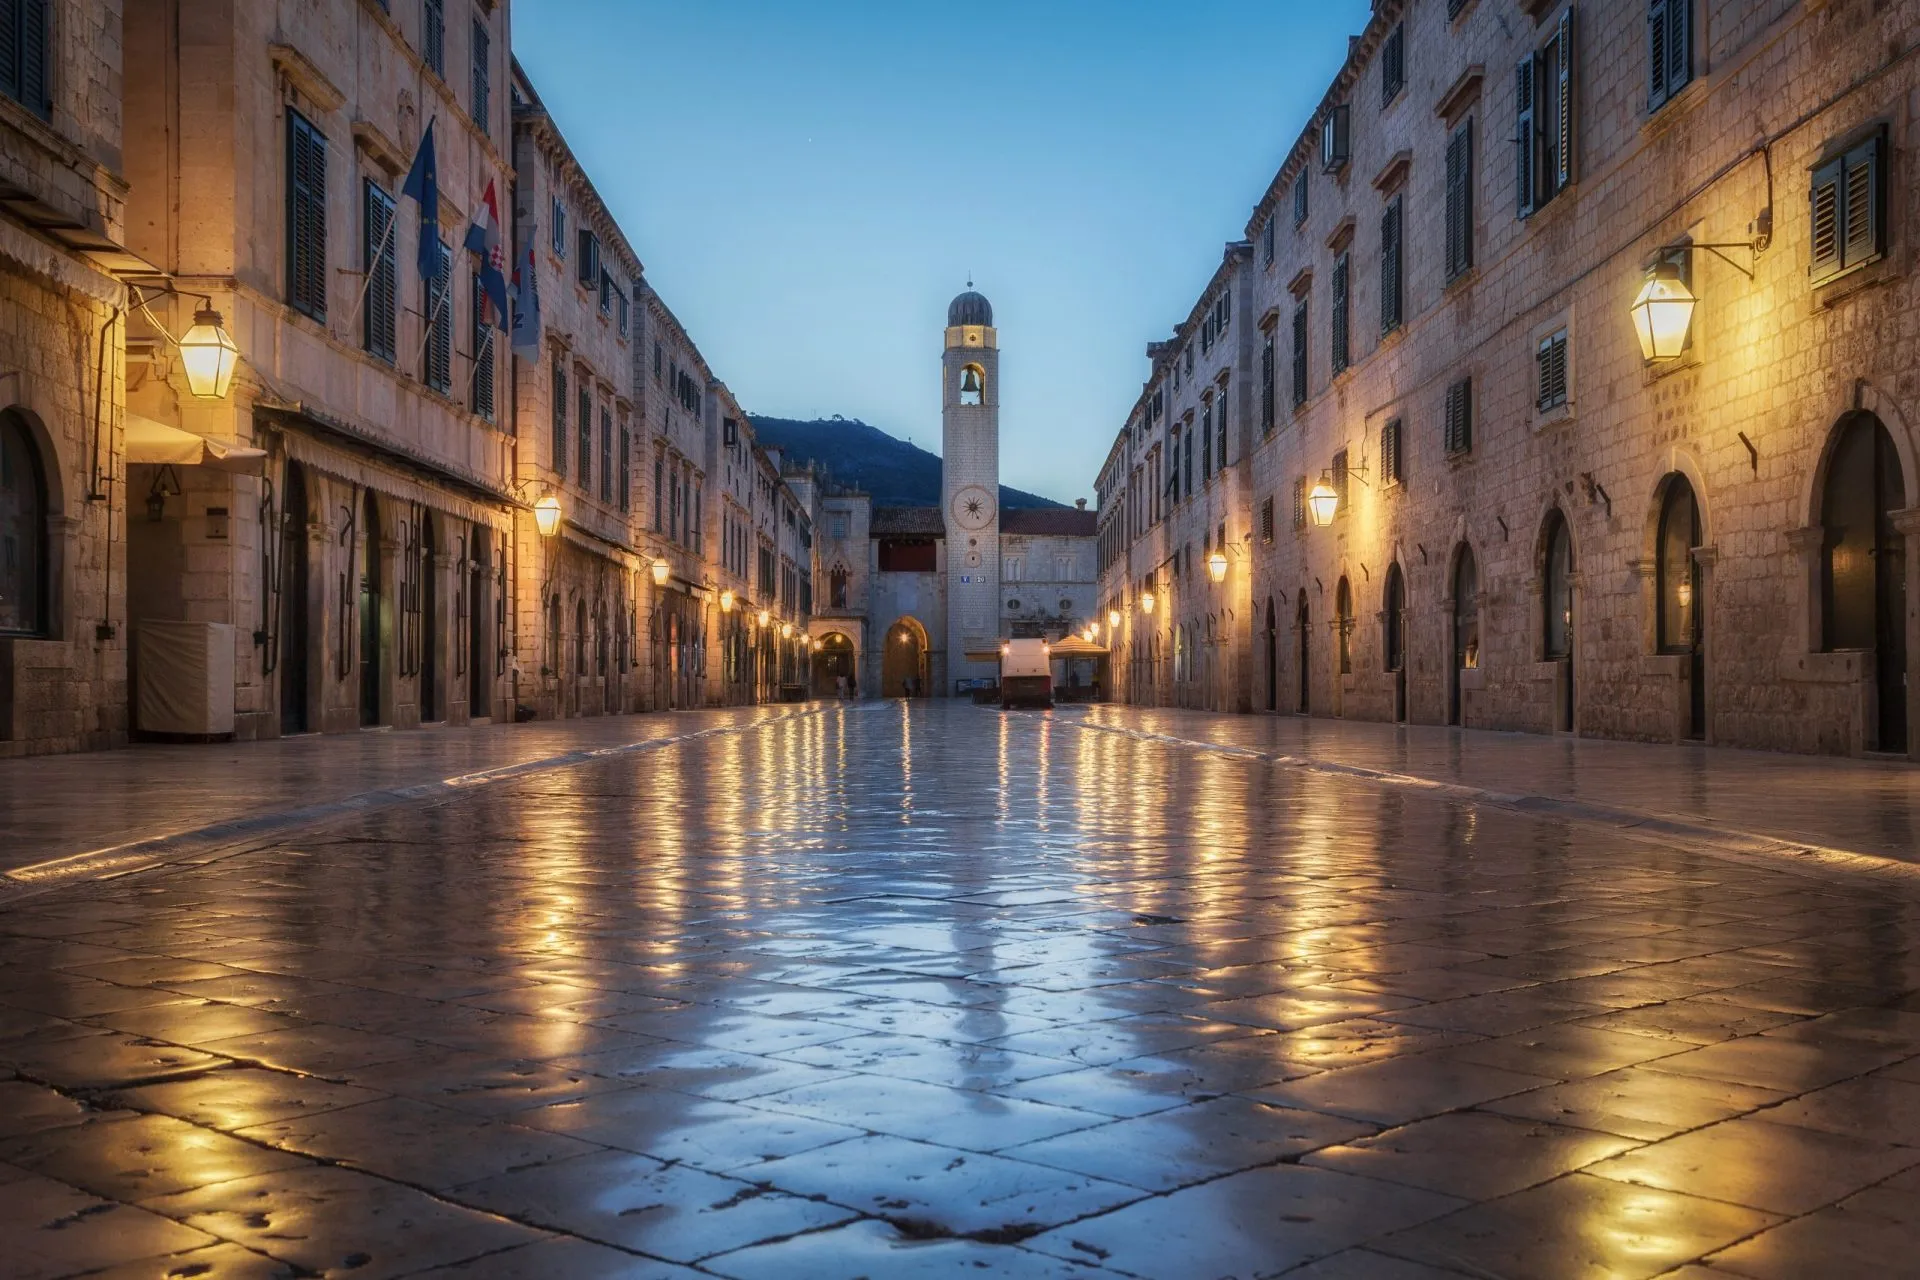 Old town of dubrovnik with famous stradun